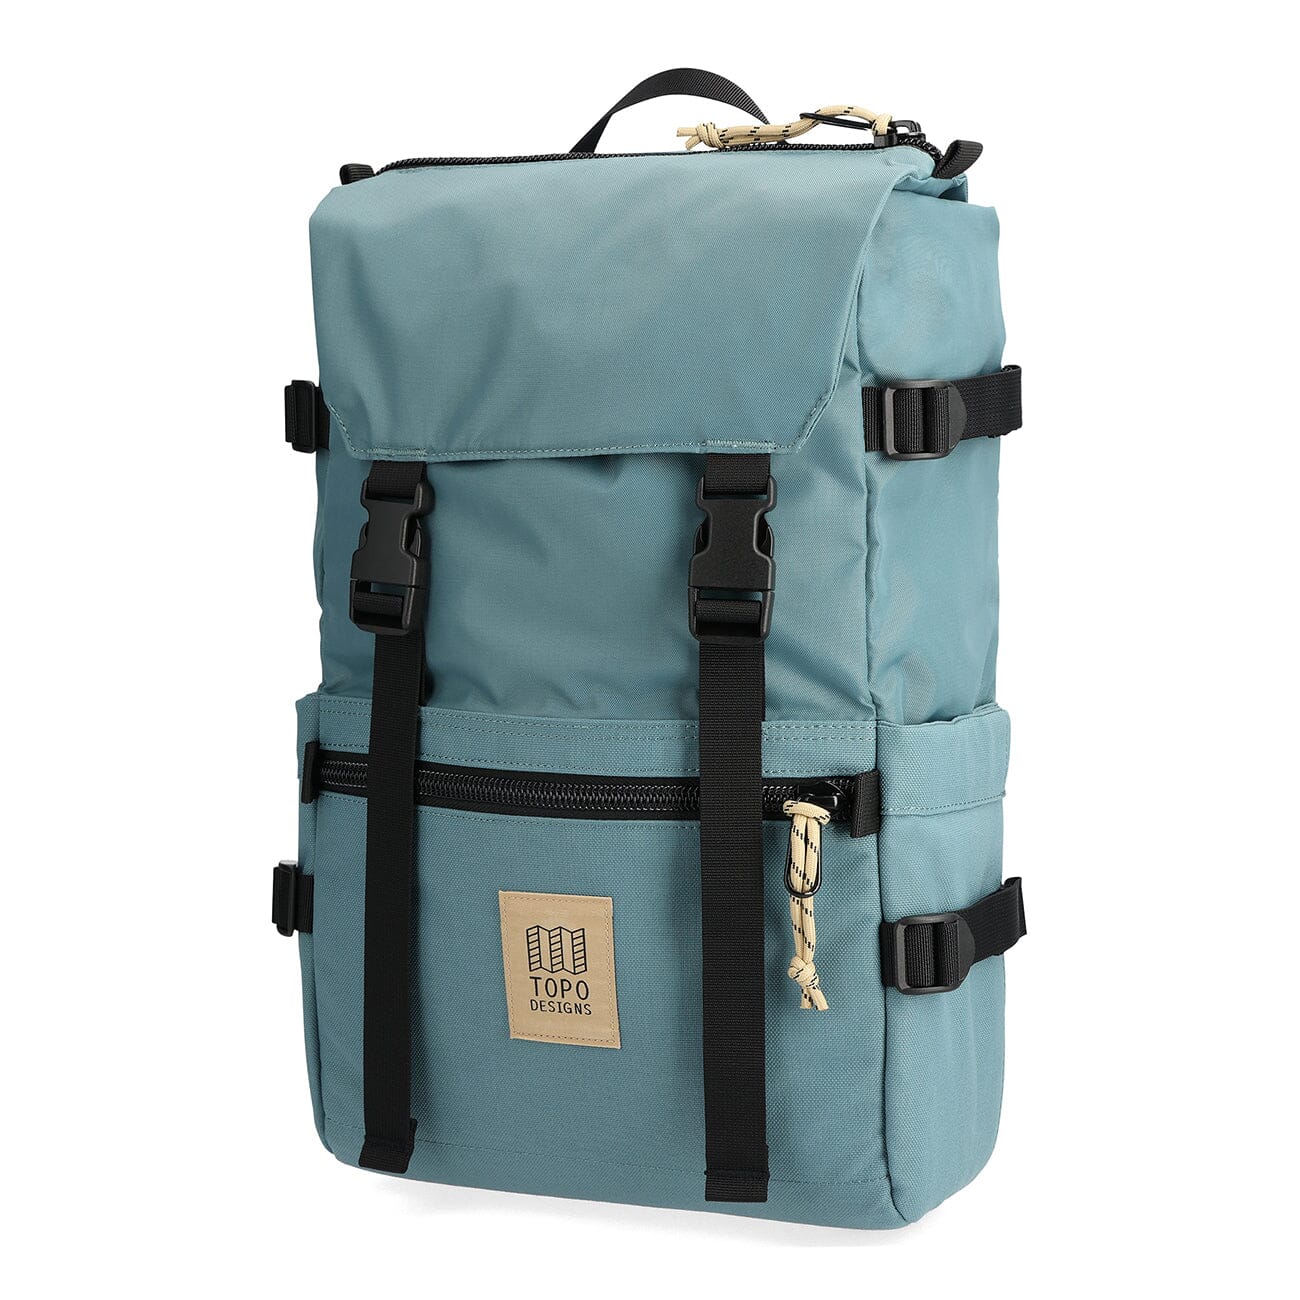 sea pine light blue recycled nylon backpack rover pack classic side